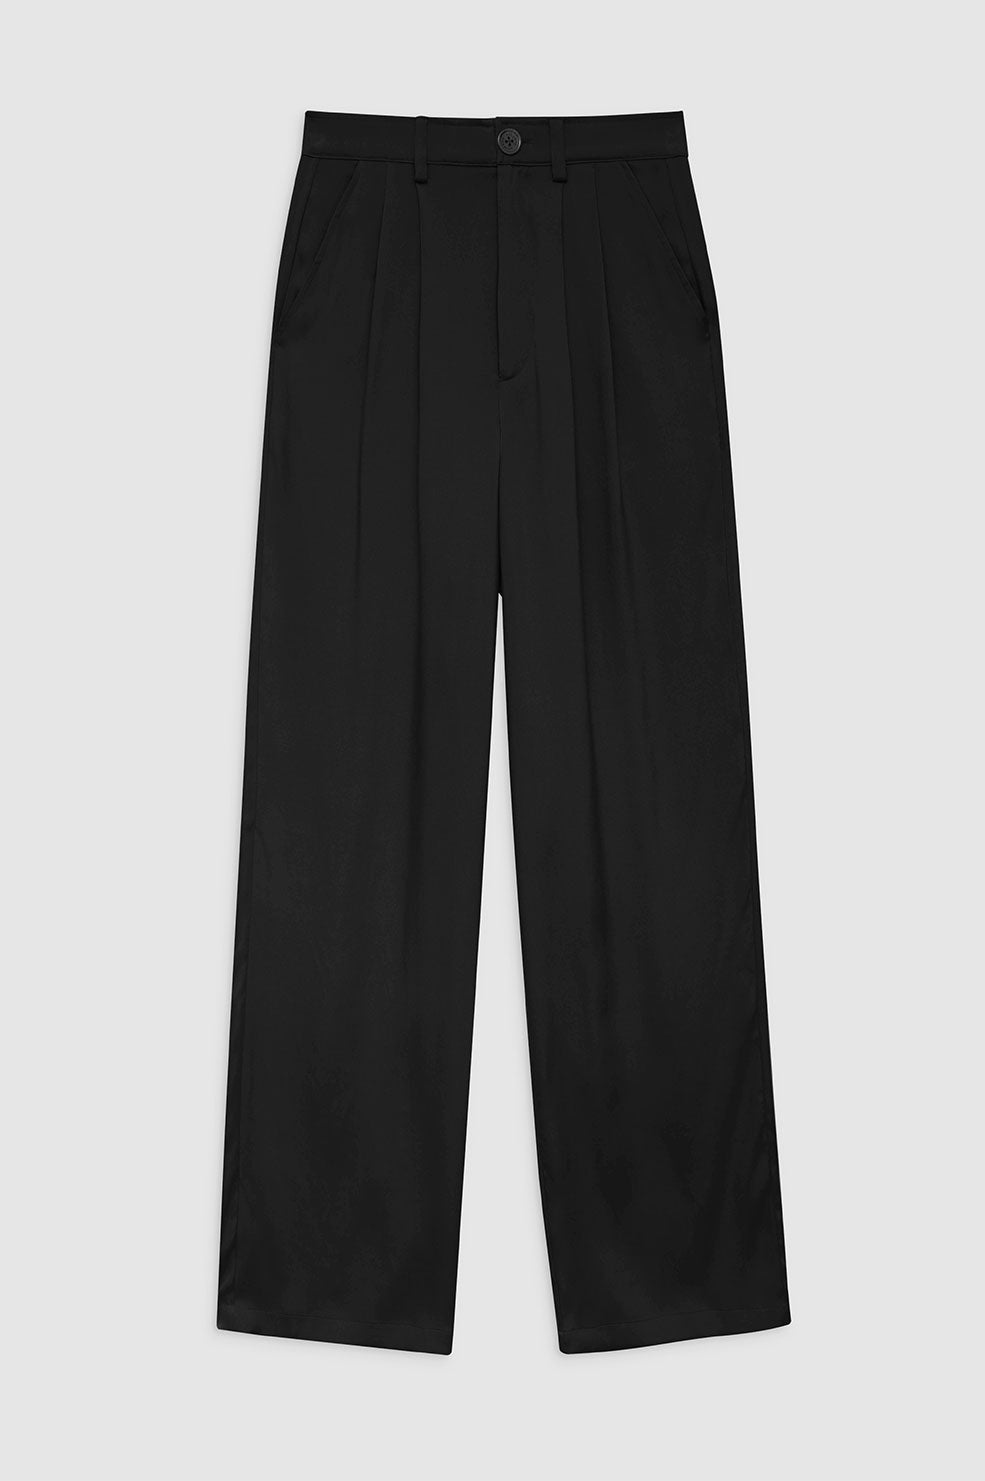 ANINE BING Carrie Pant - Black Silk - Front View